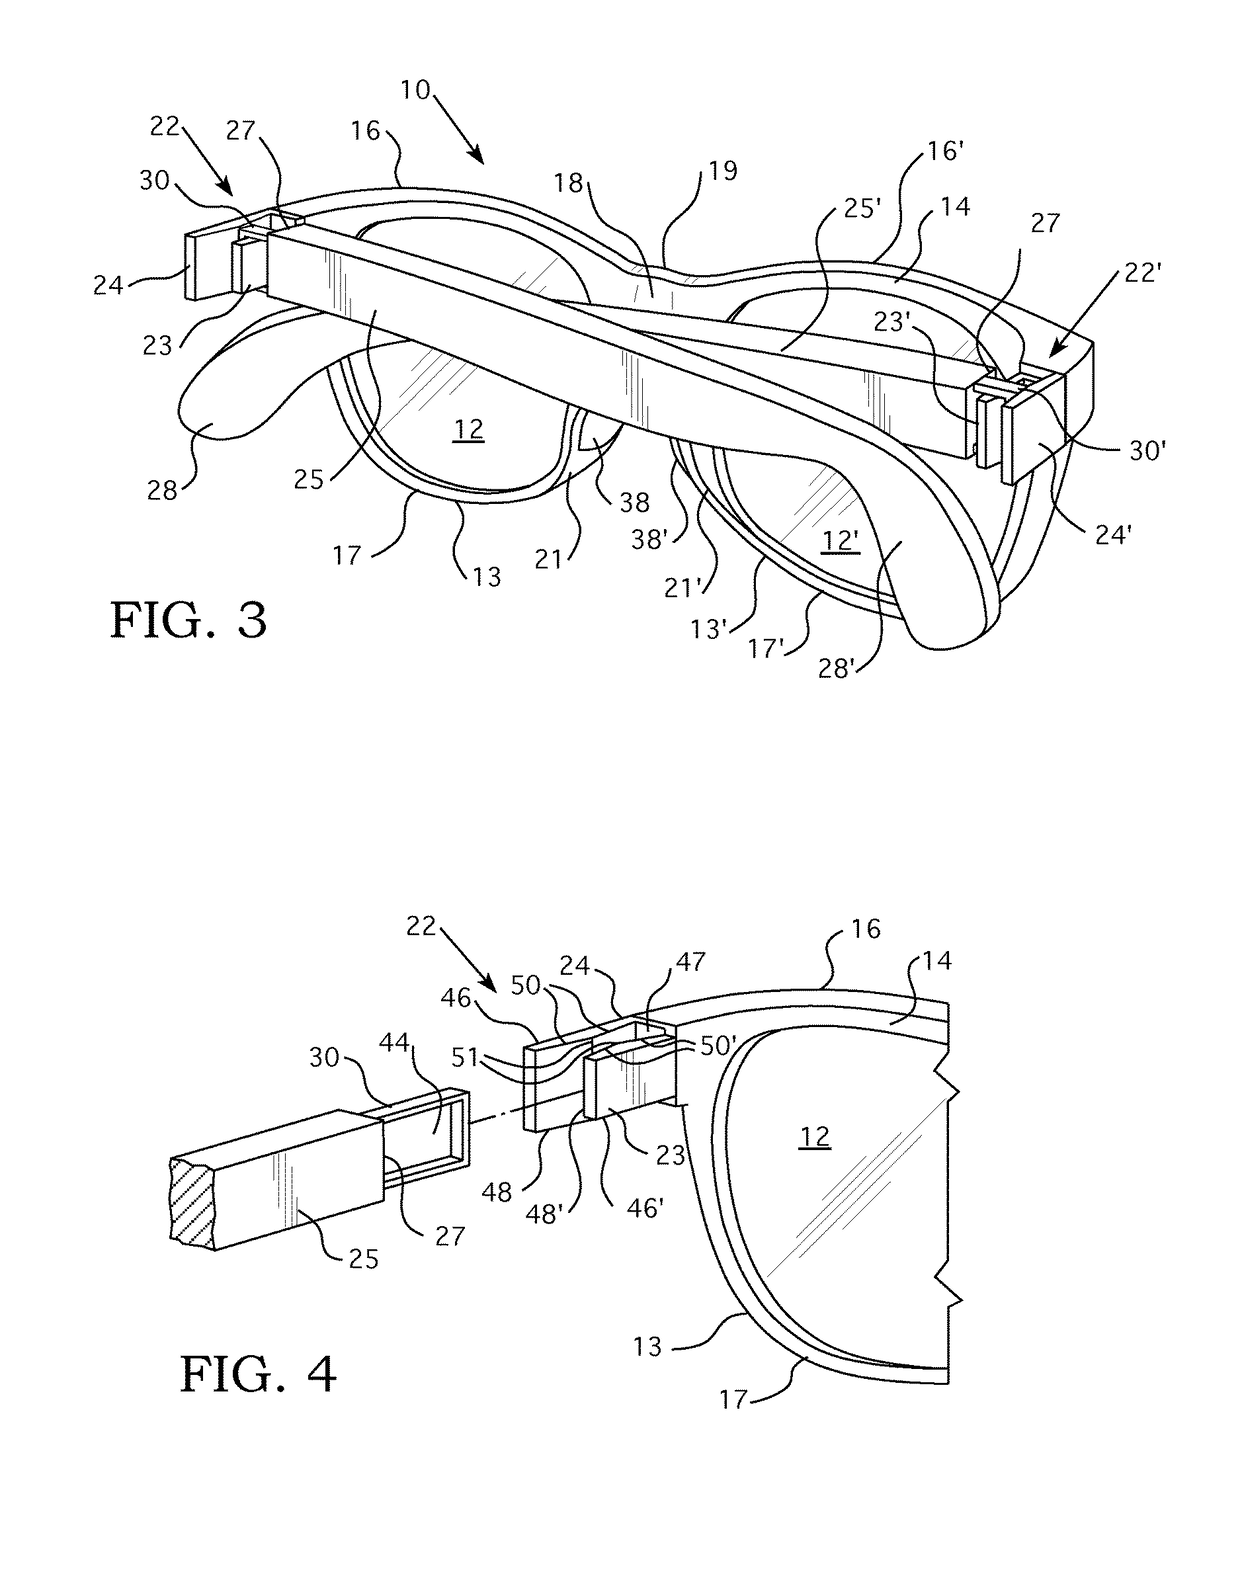 Eyeglasses with Detachable Temples and Nose Grip and Method of Use